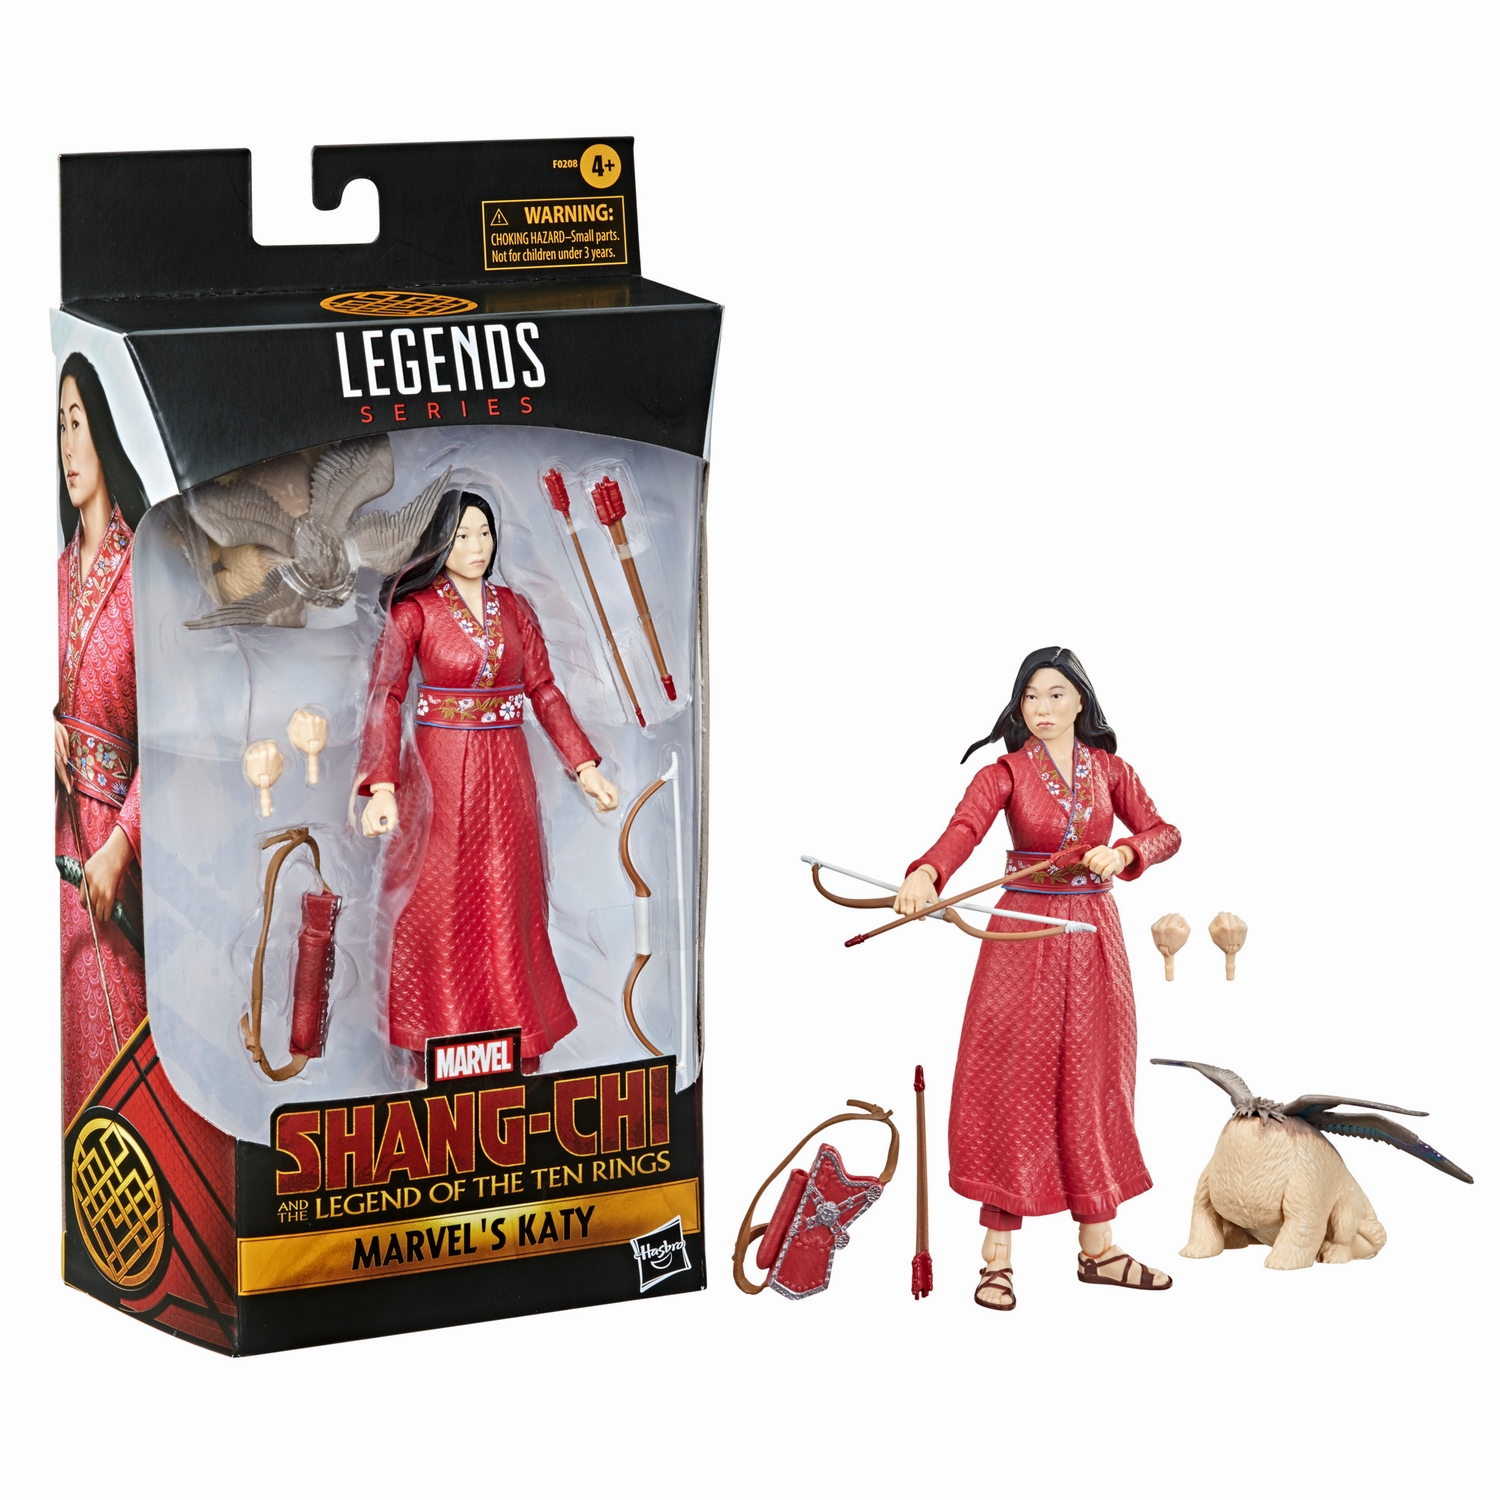 MARVEL LEGENDS SERIES 6-INCH SHANG-CHI AND THE LEGEND OF THE TEN RINGS MARVEL’S KATY -2.jpg